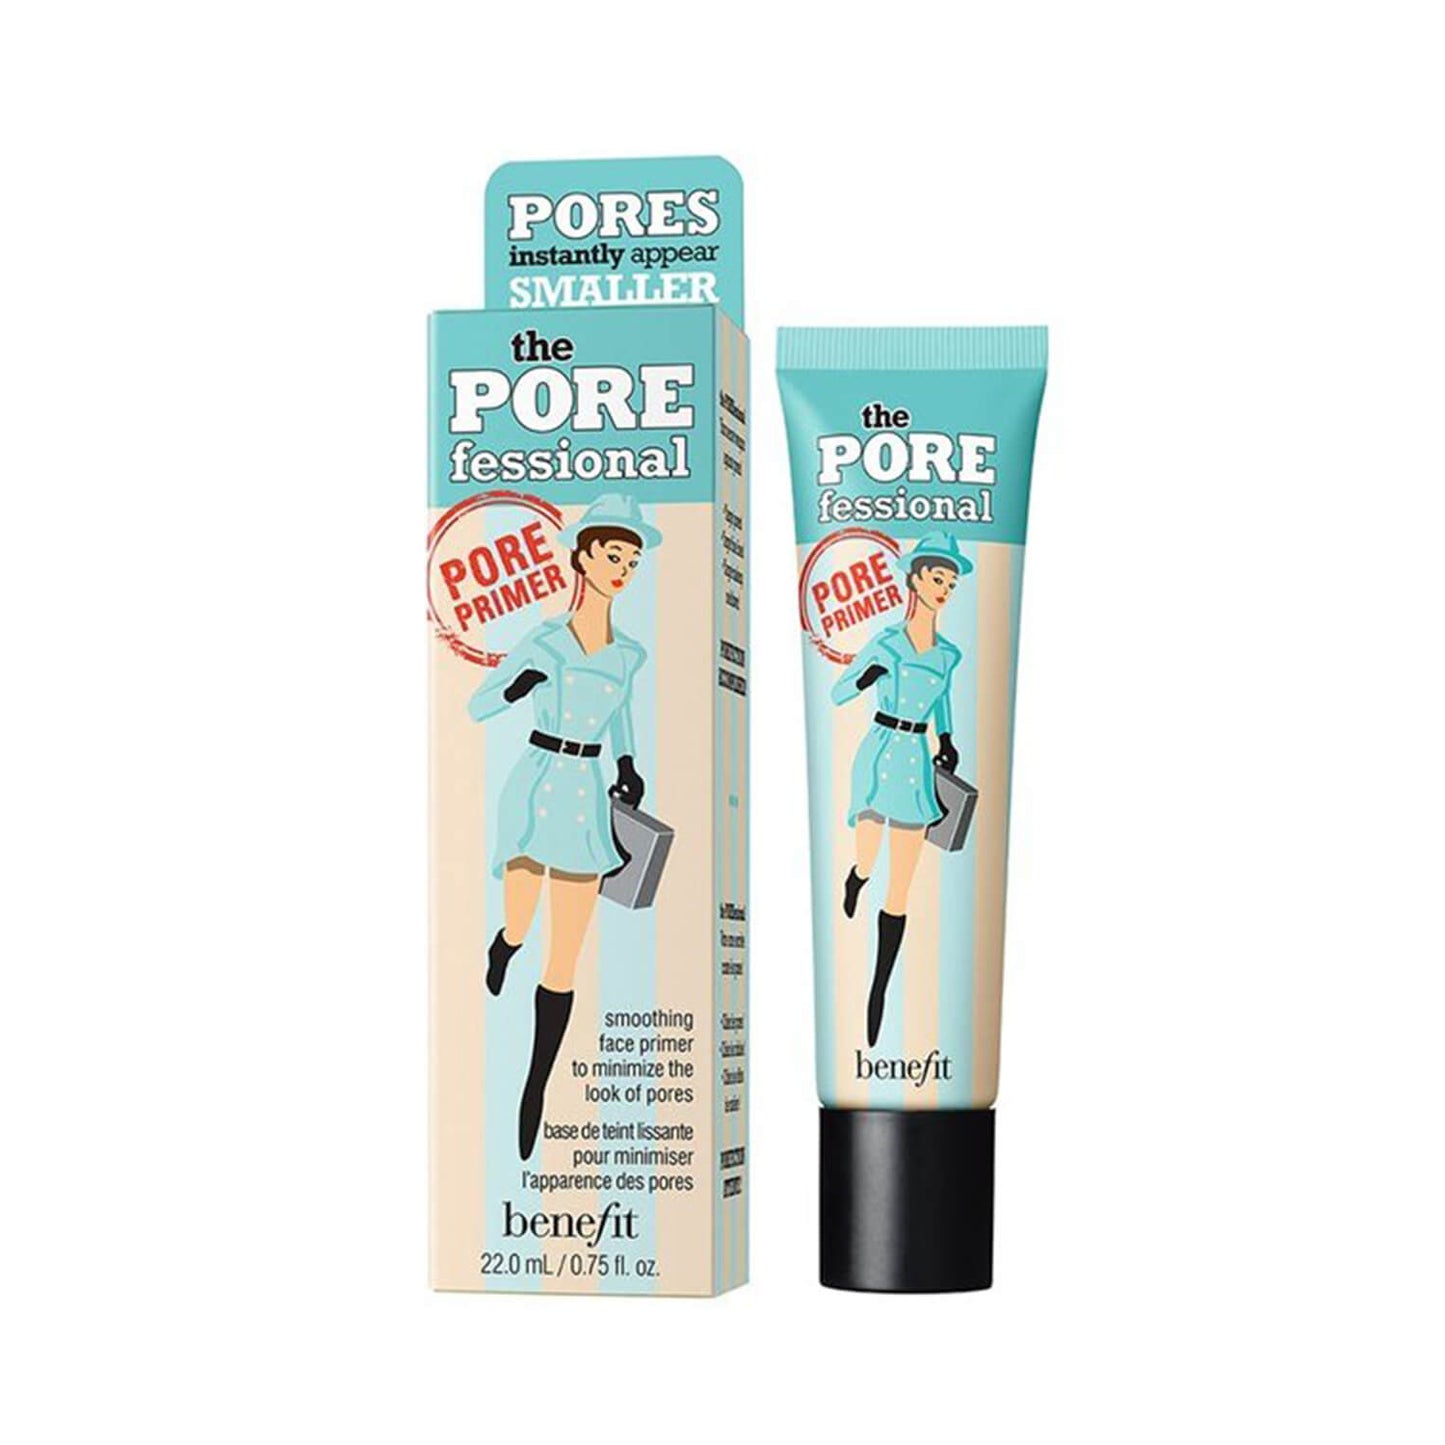 Benefit The POREfessional Pore Minimizing Primer available at Heygirl.pk for delivery in Karachi, Lahore, Islamabad across Pakistan.